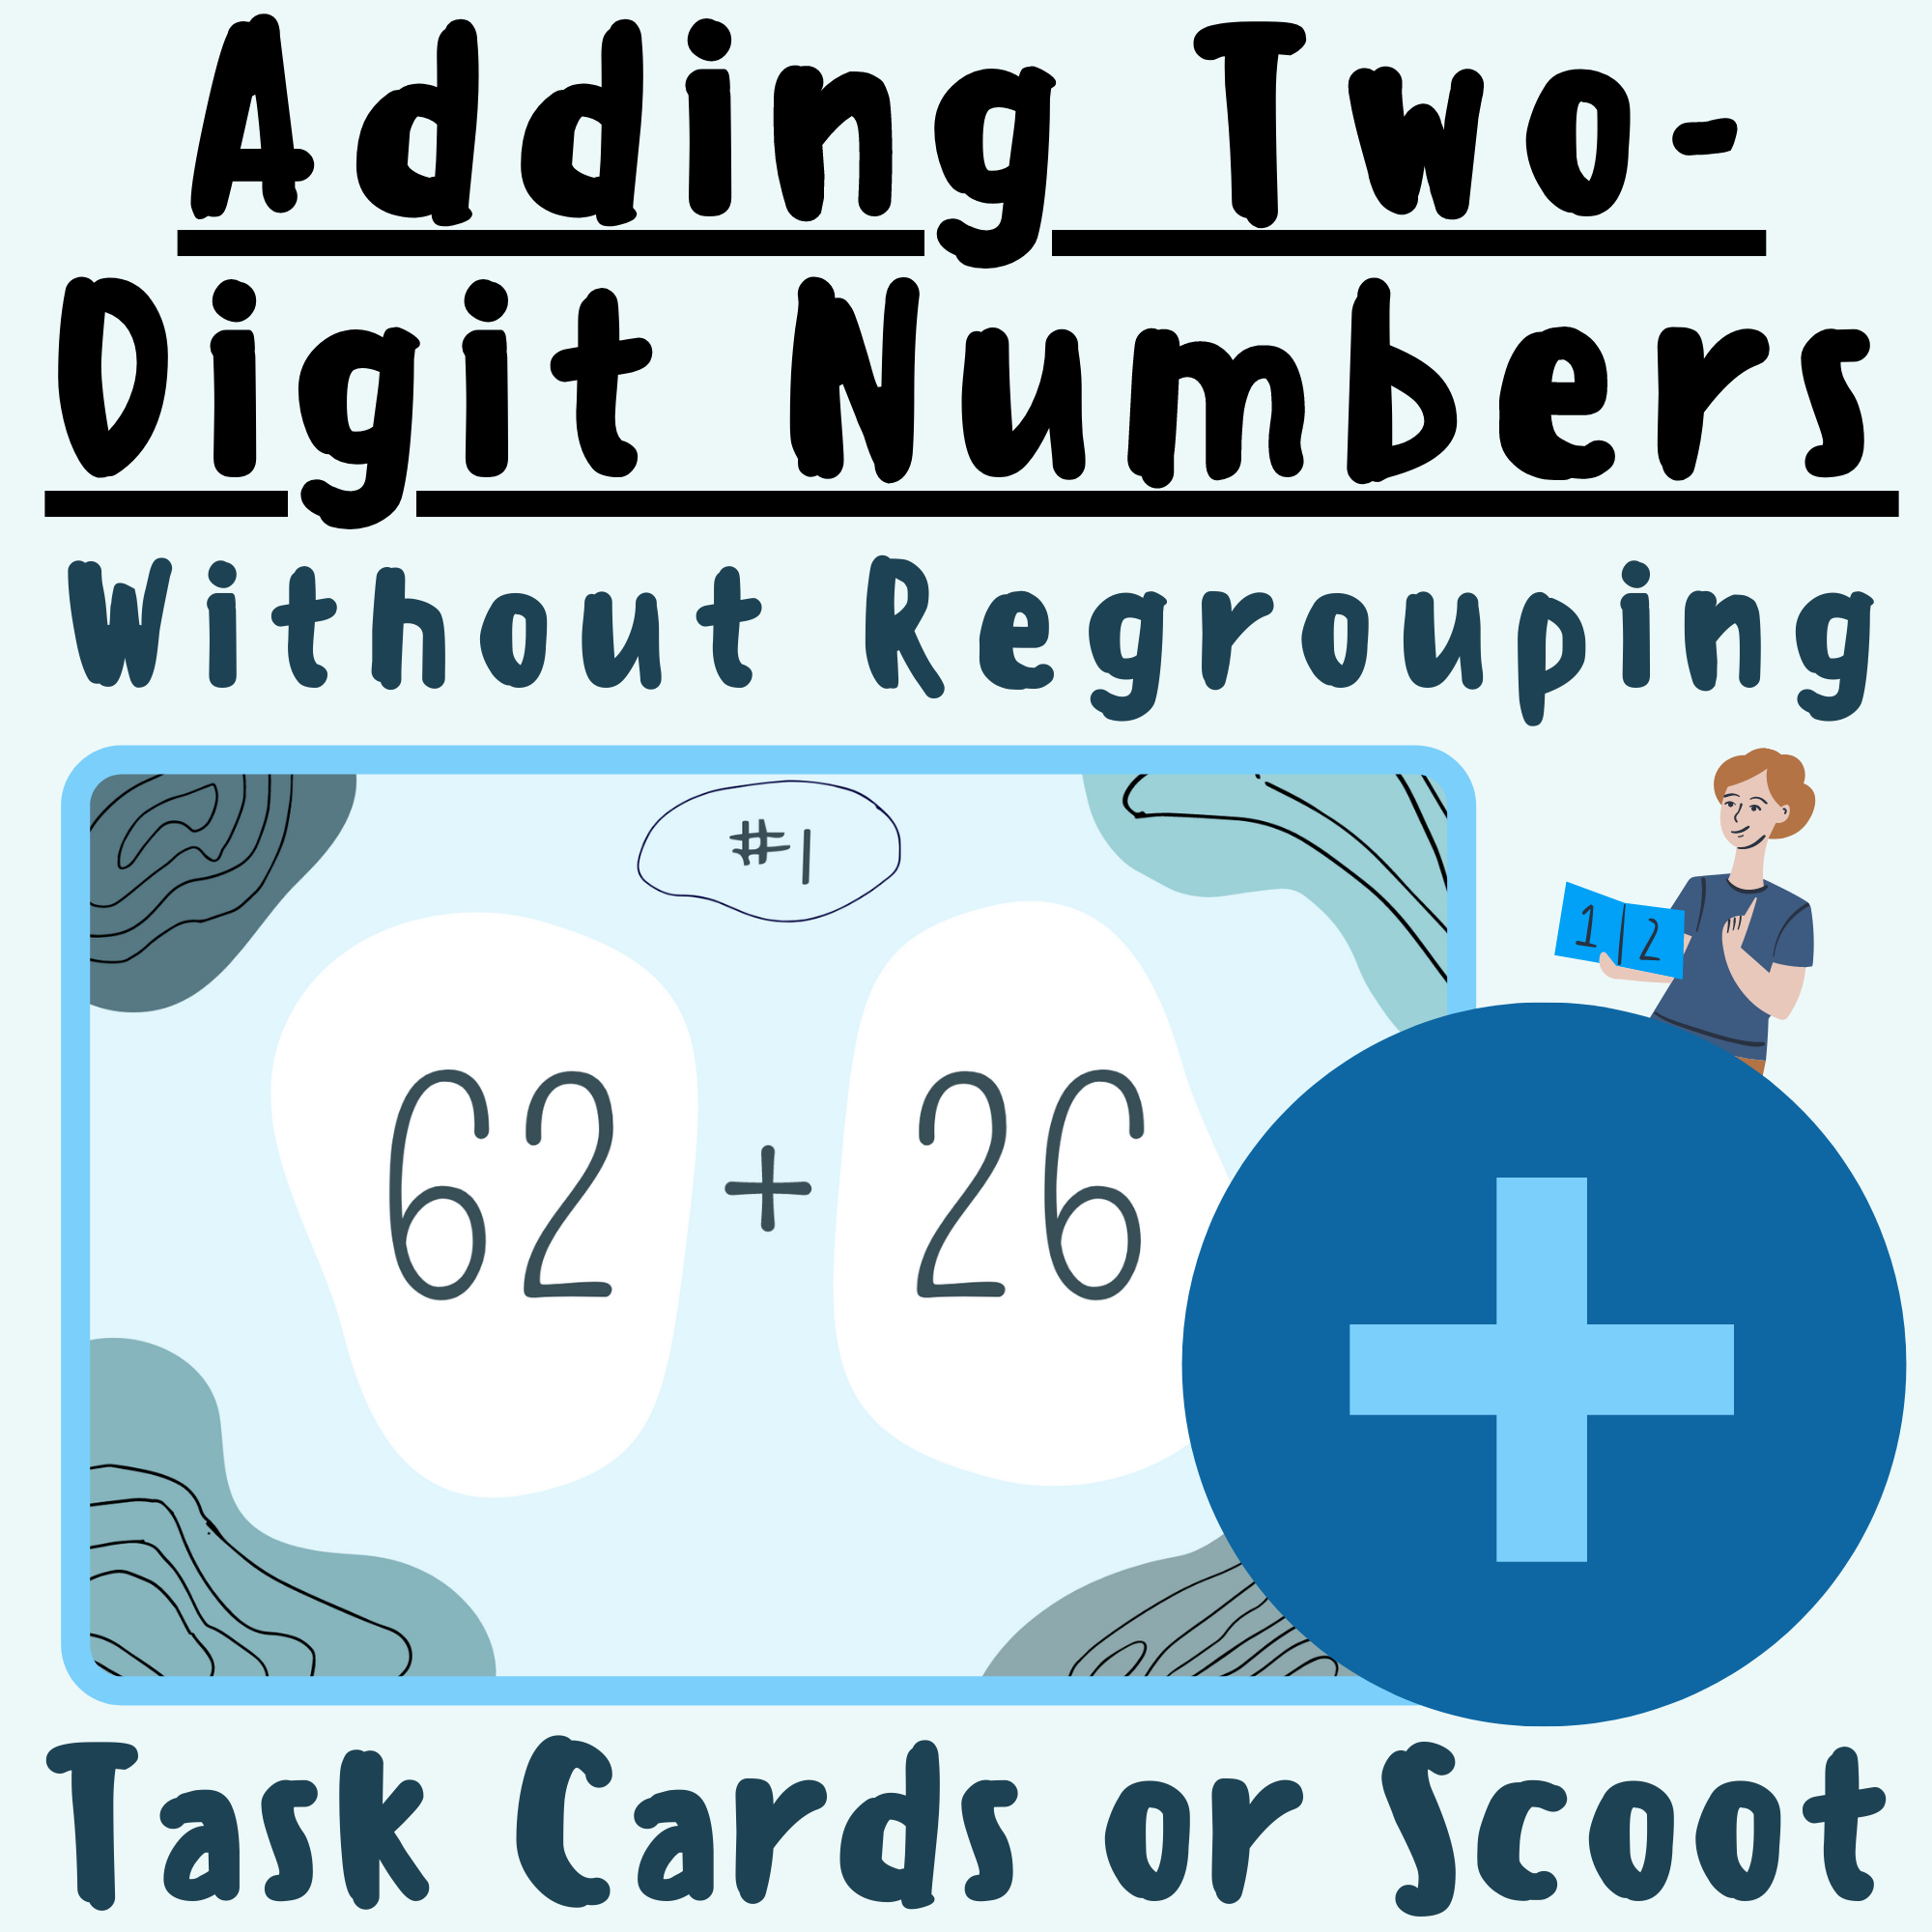 Adding Two-Digit Numbers Without Regrouping and Composing SCOOT or TASK CARDS; For K-5 Teachers and Students in the Math Classroom